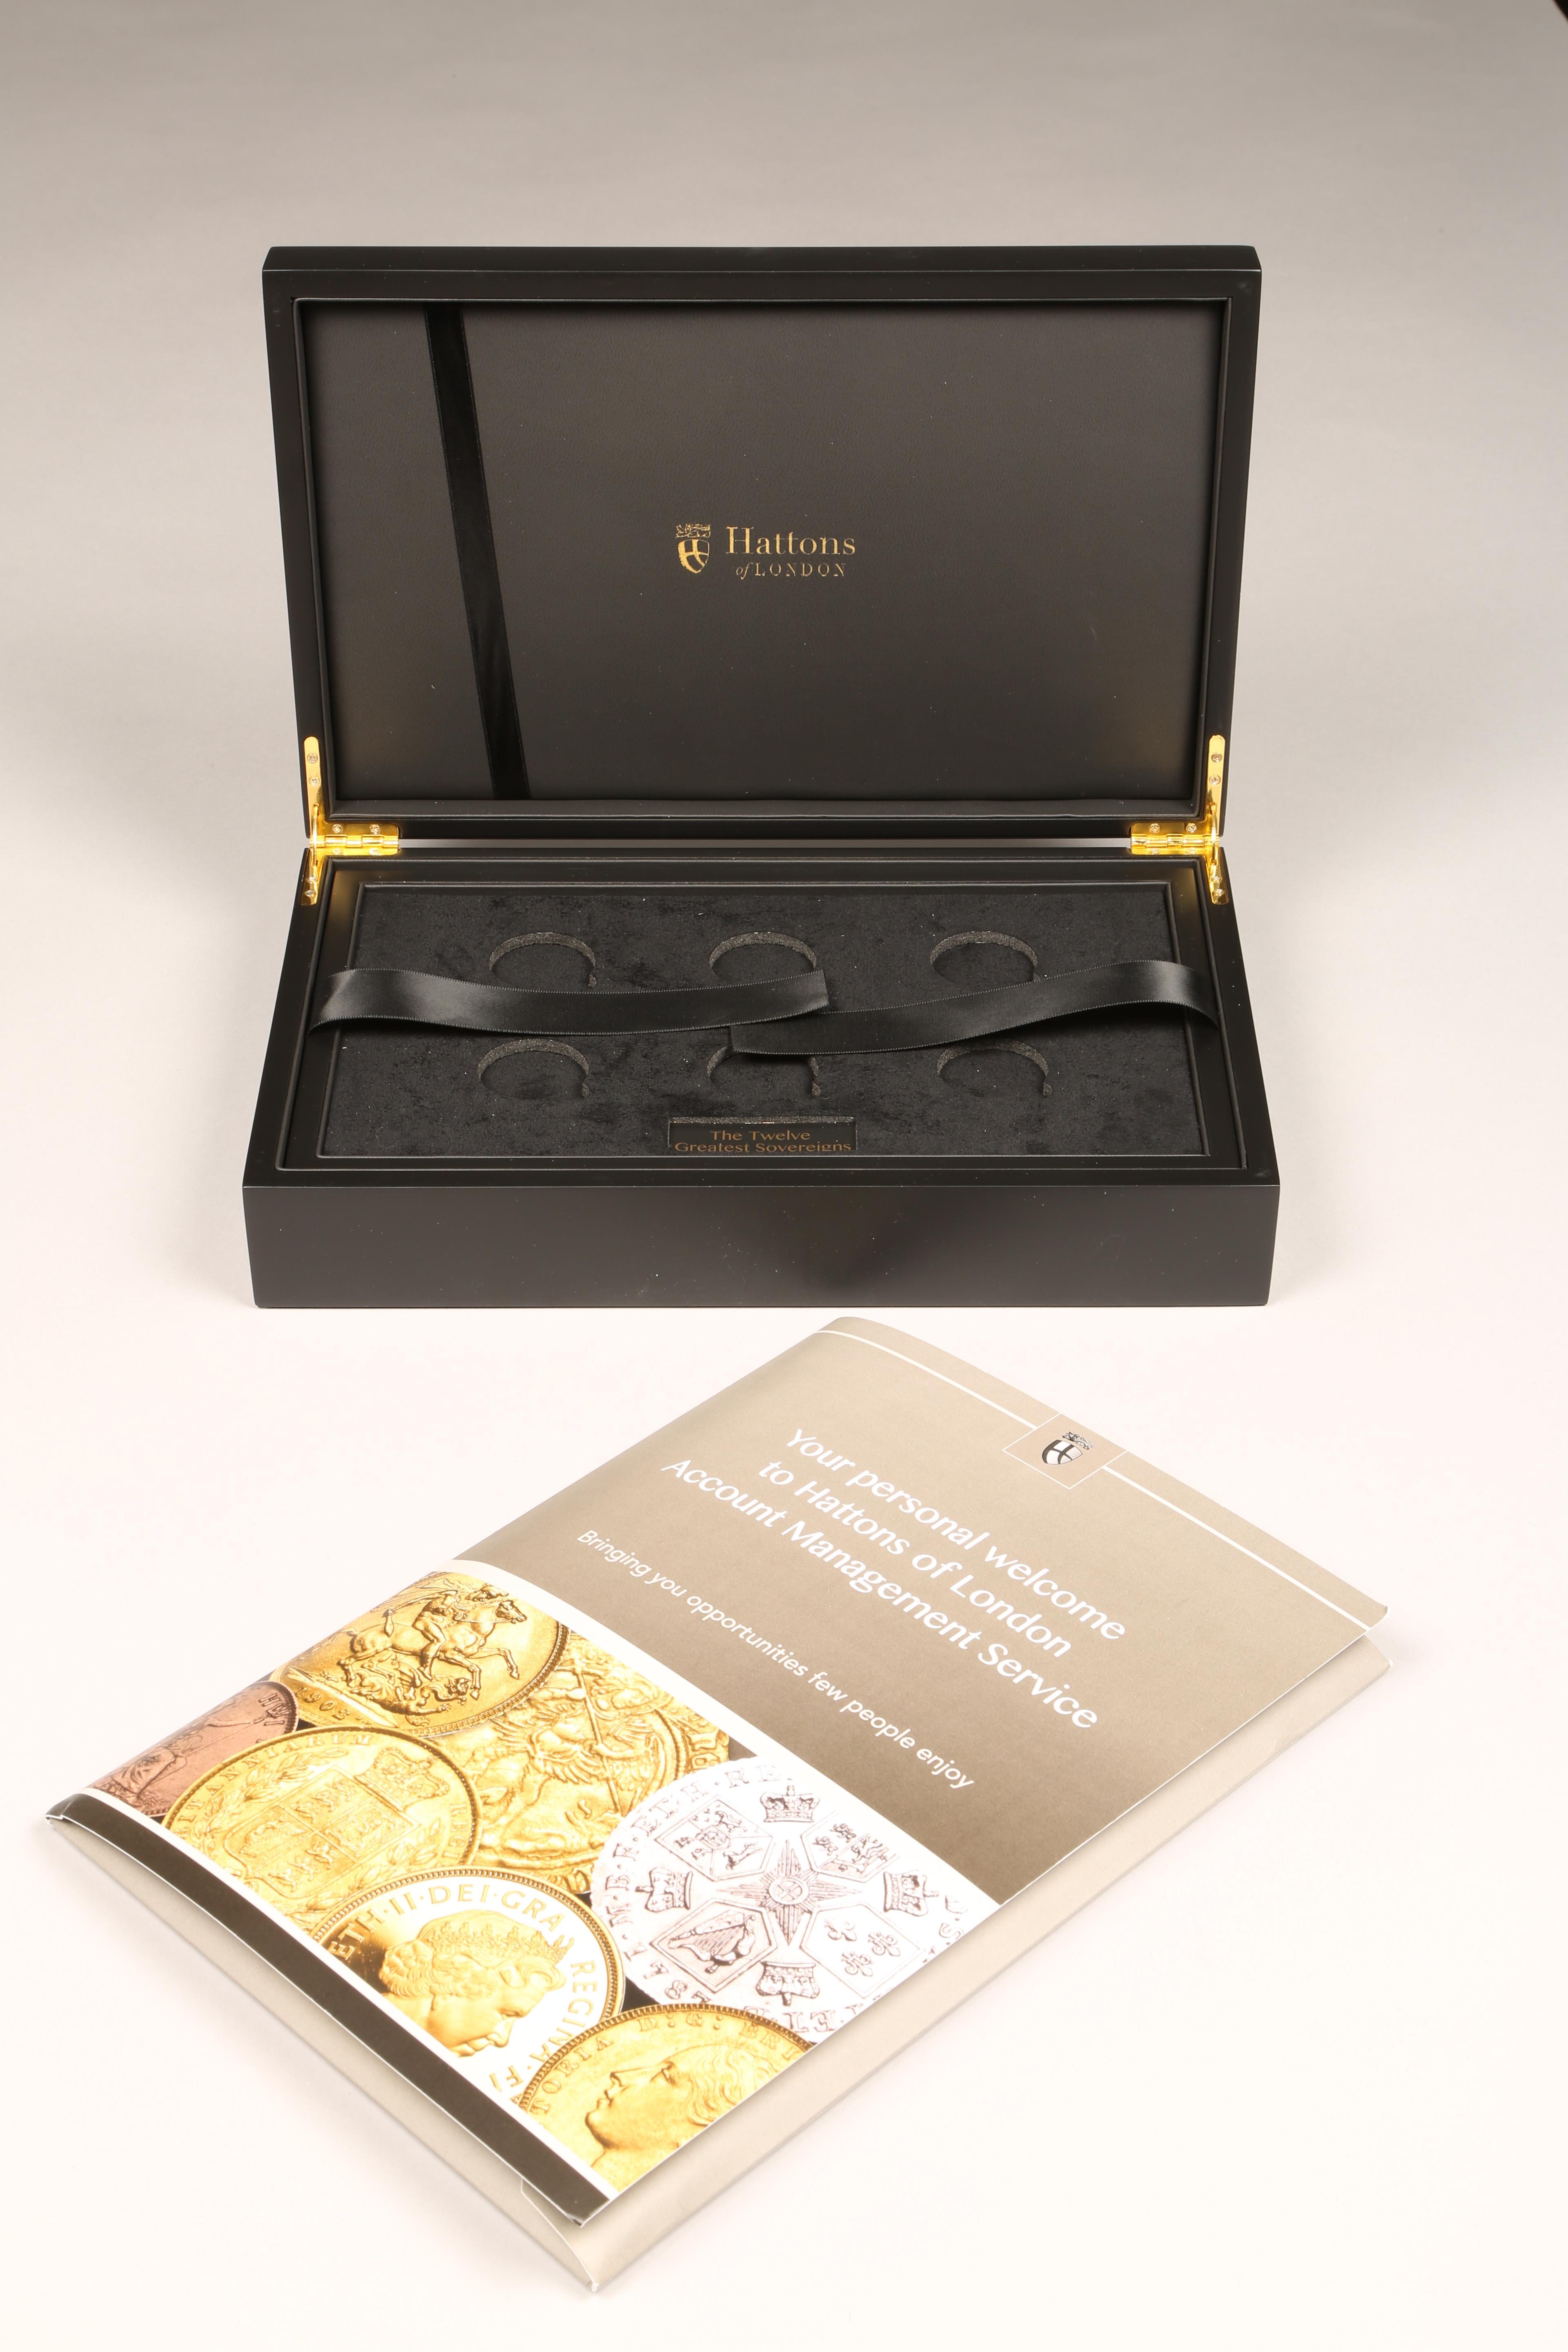 The twelve greatest sovereigns book celebrating the 200th anniversary of the sovereign along with